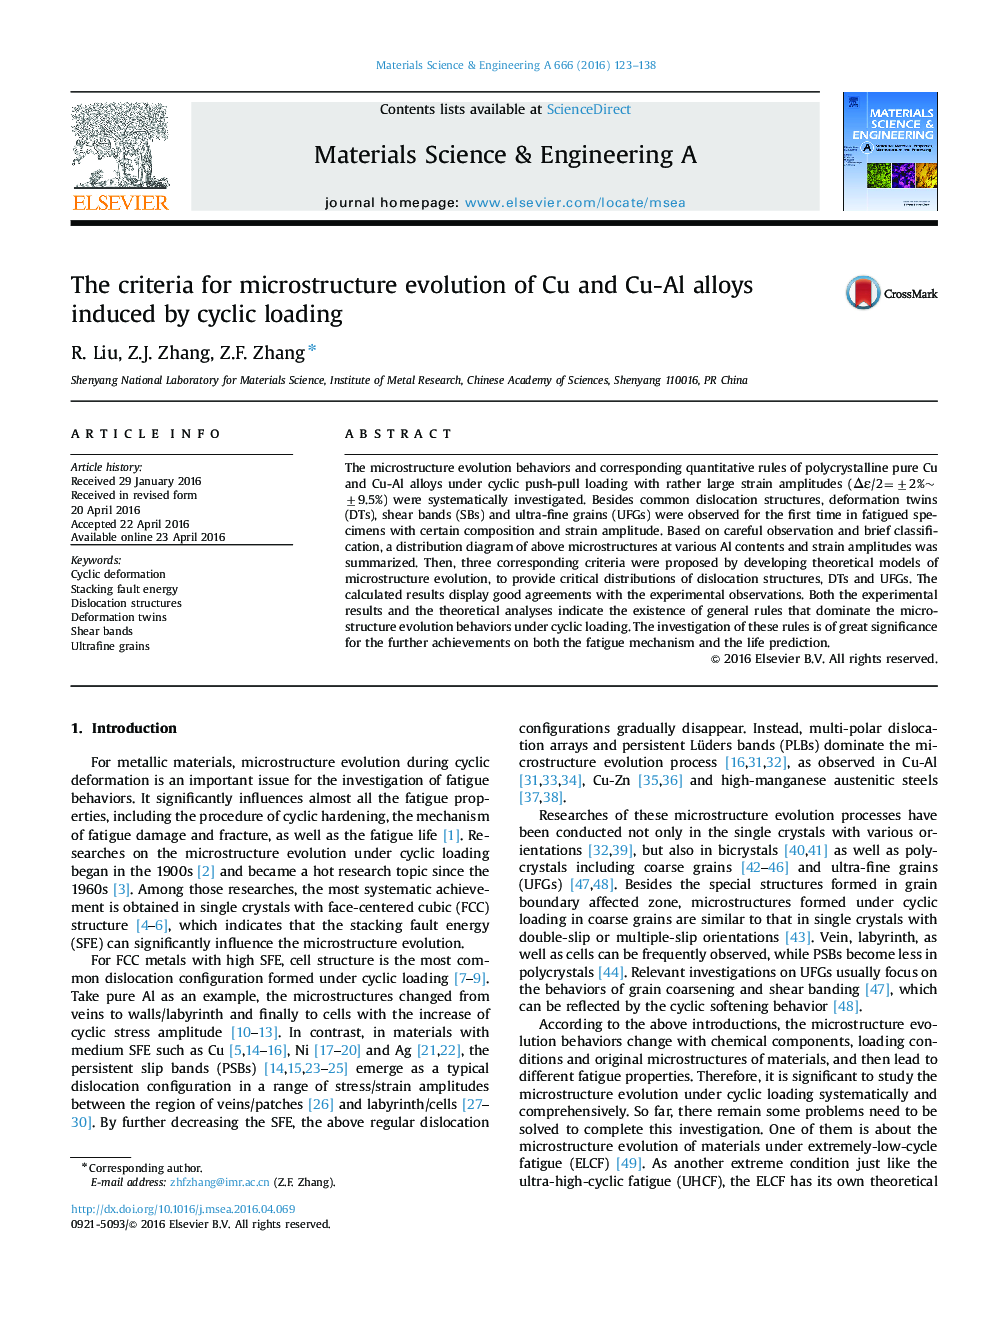 The criteria for microstructure evolution of Cu and Cu-Al alloys induced by cyclic loading